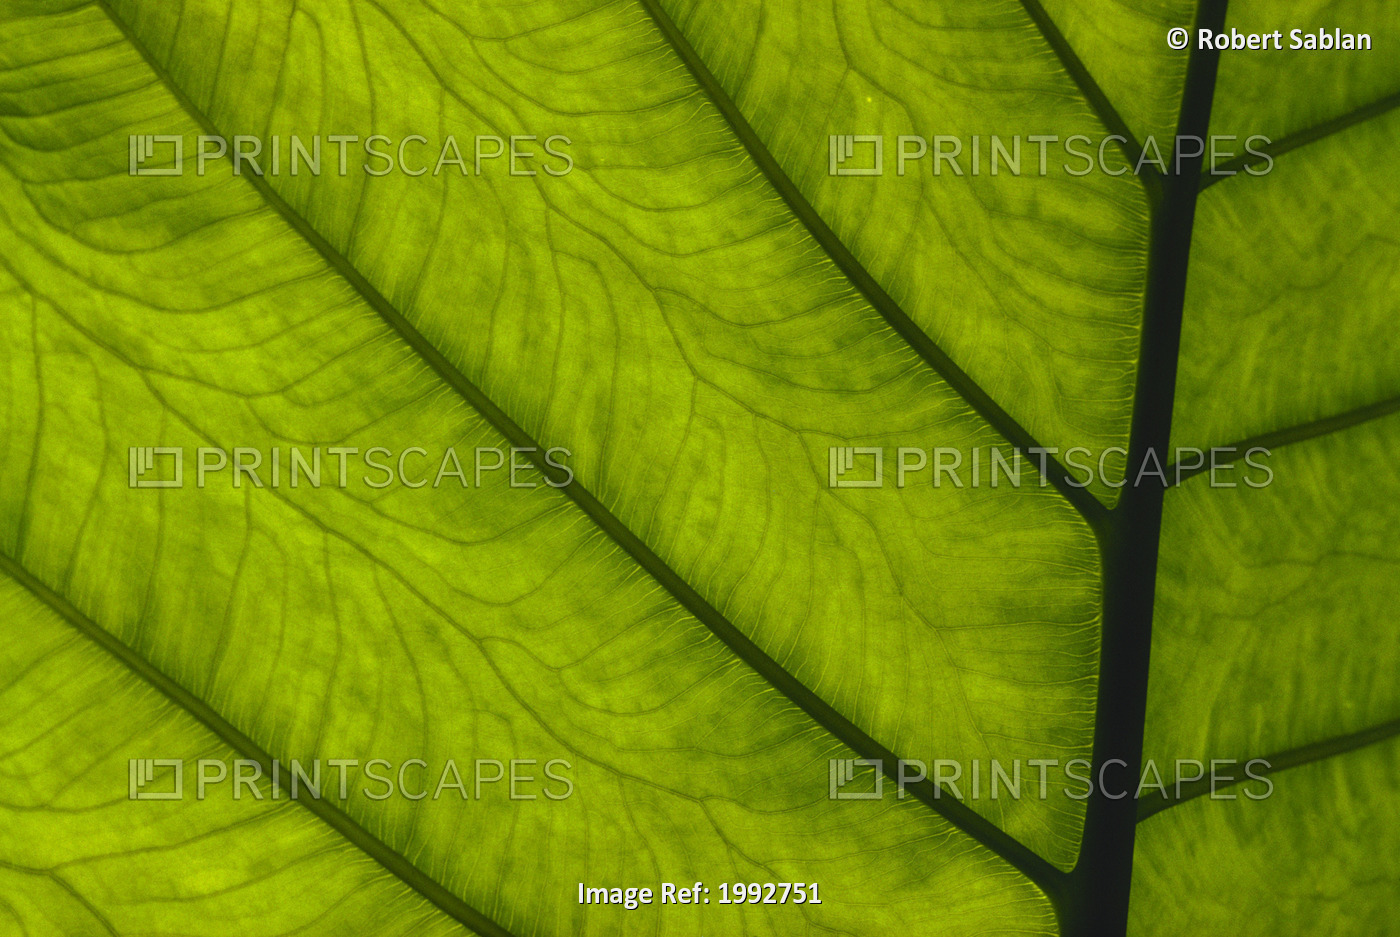 Extreme Close-Up Of Green Leaf, Main Stem With Veins Running Through.